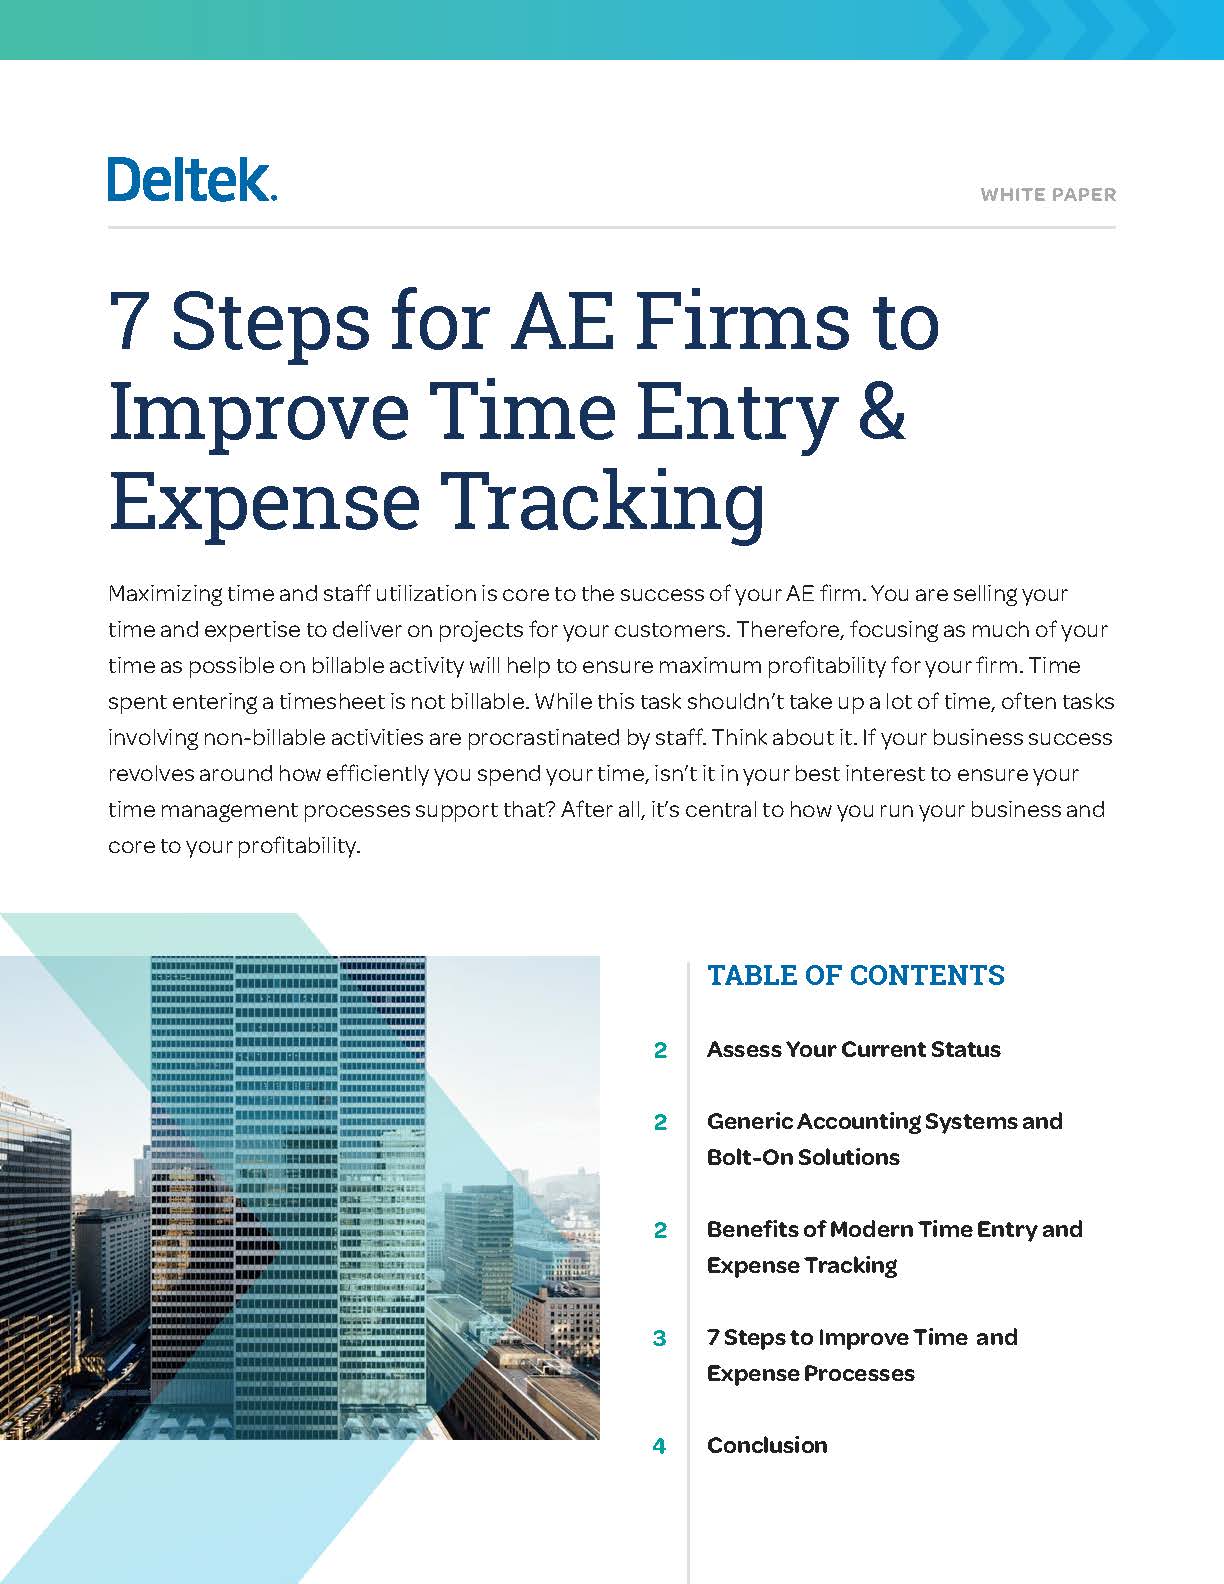 7 Steps for A&E Firms to Optimize Time Entry & Expense Tracking